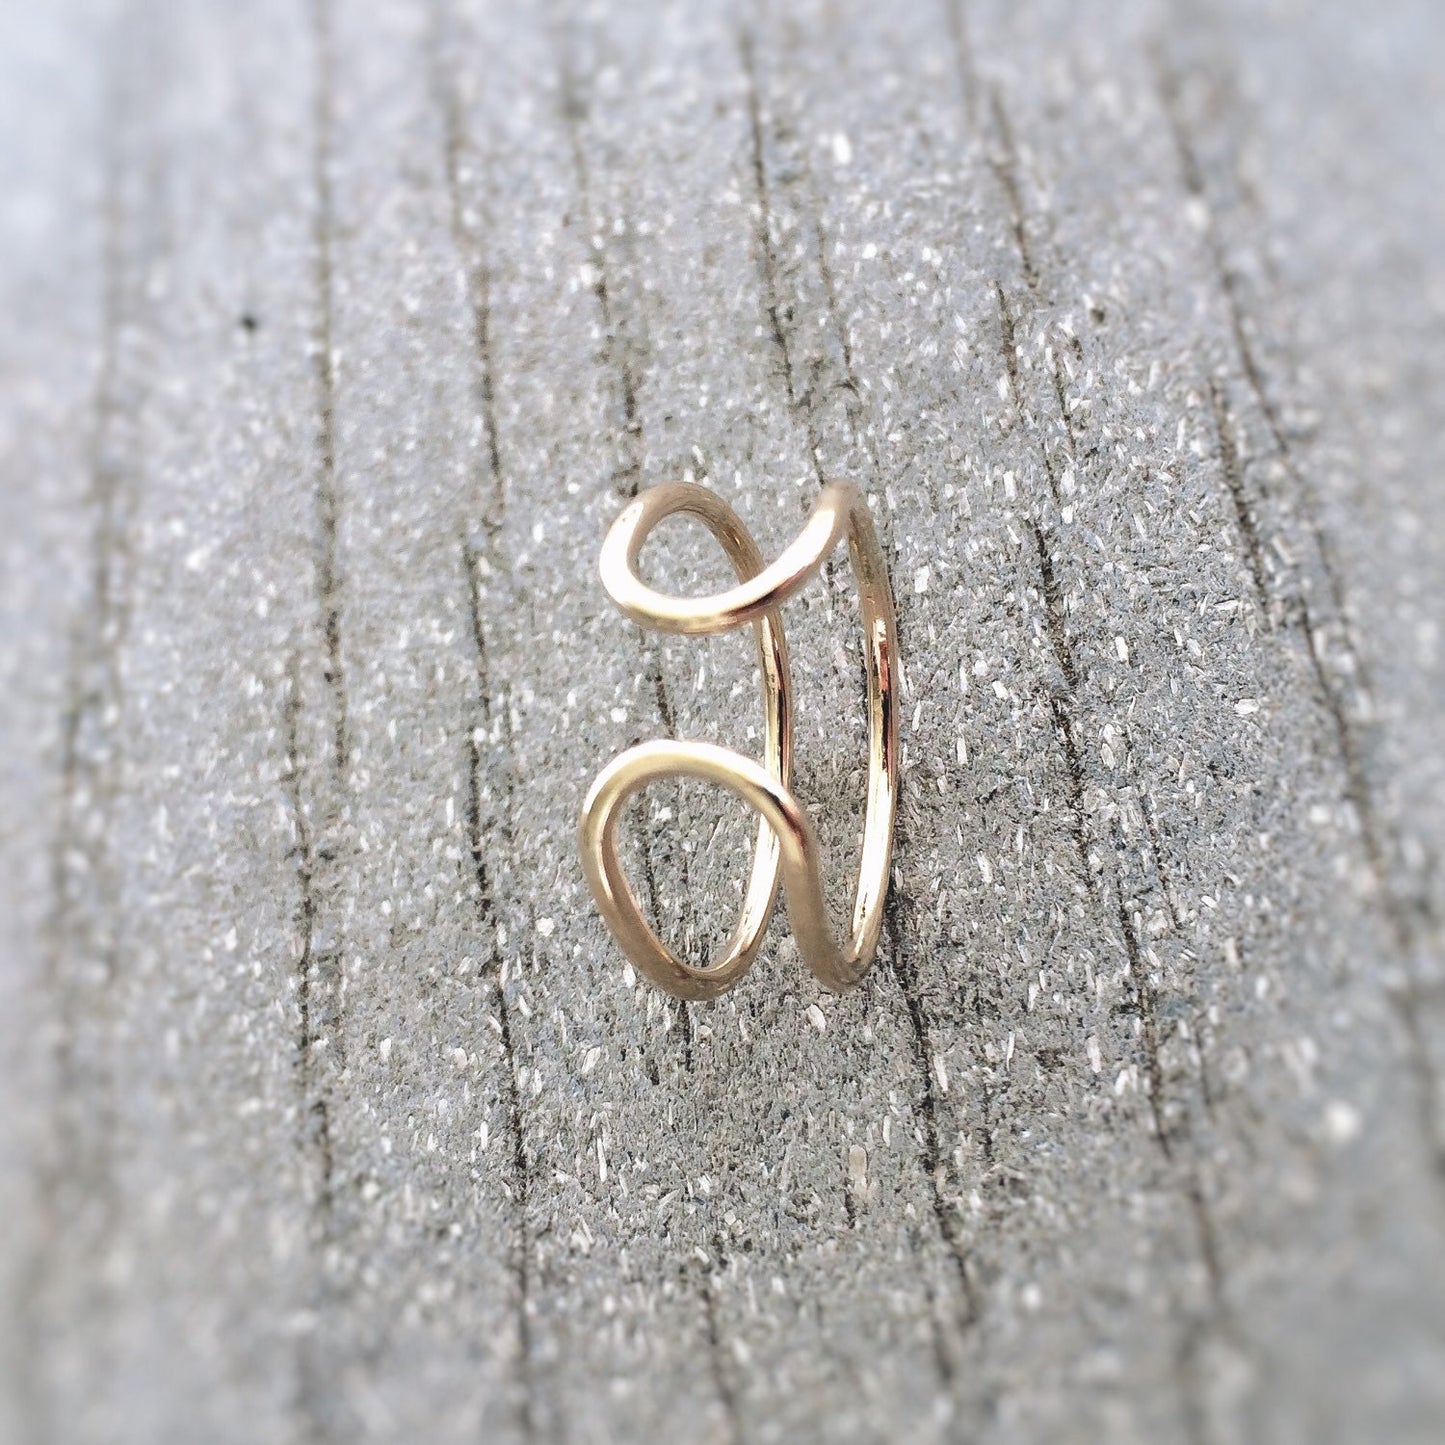 Open Ring, Minimalist Ring, Modern Ring, Double Line Ring, Simple Ring, Boho Ring, Statement Ring, Boho Chic, Open Loop Ring, Unique, U Ring